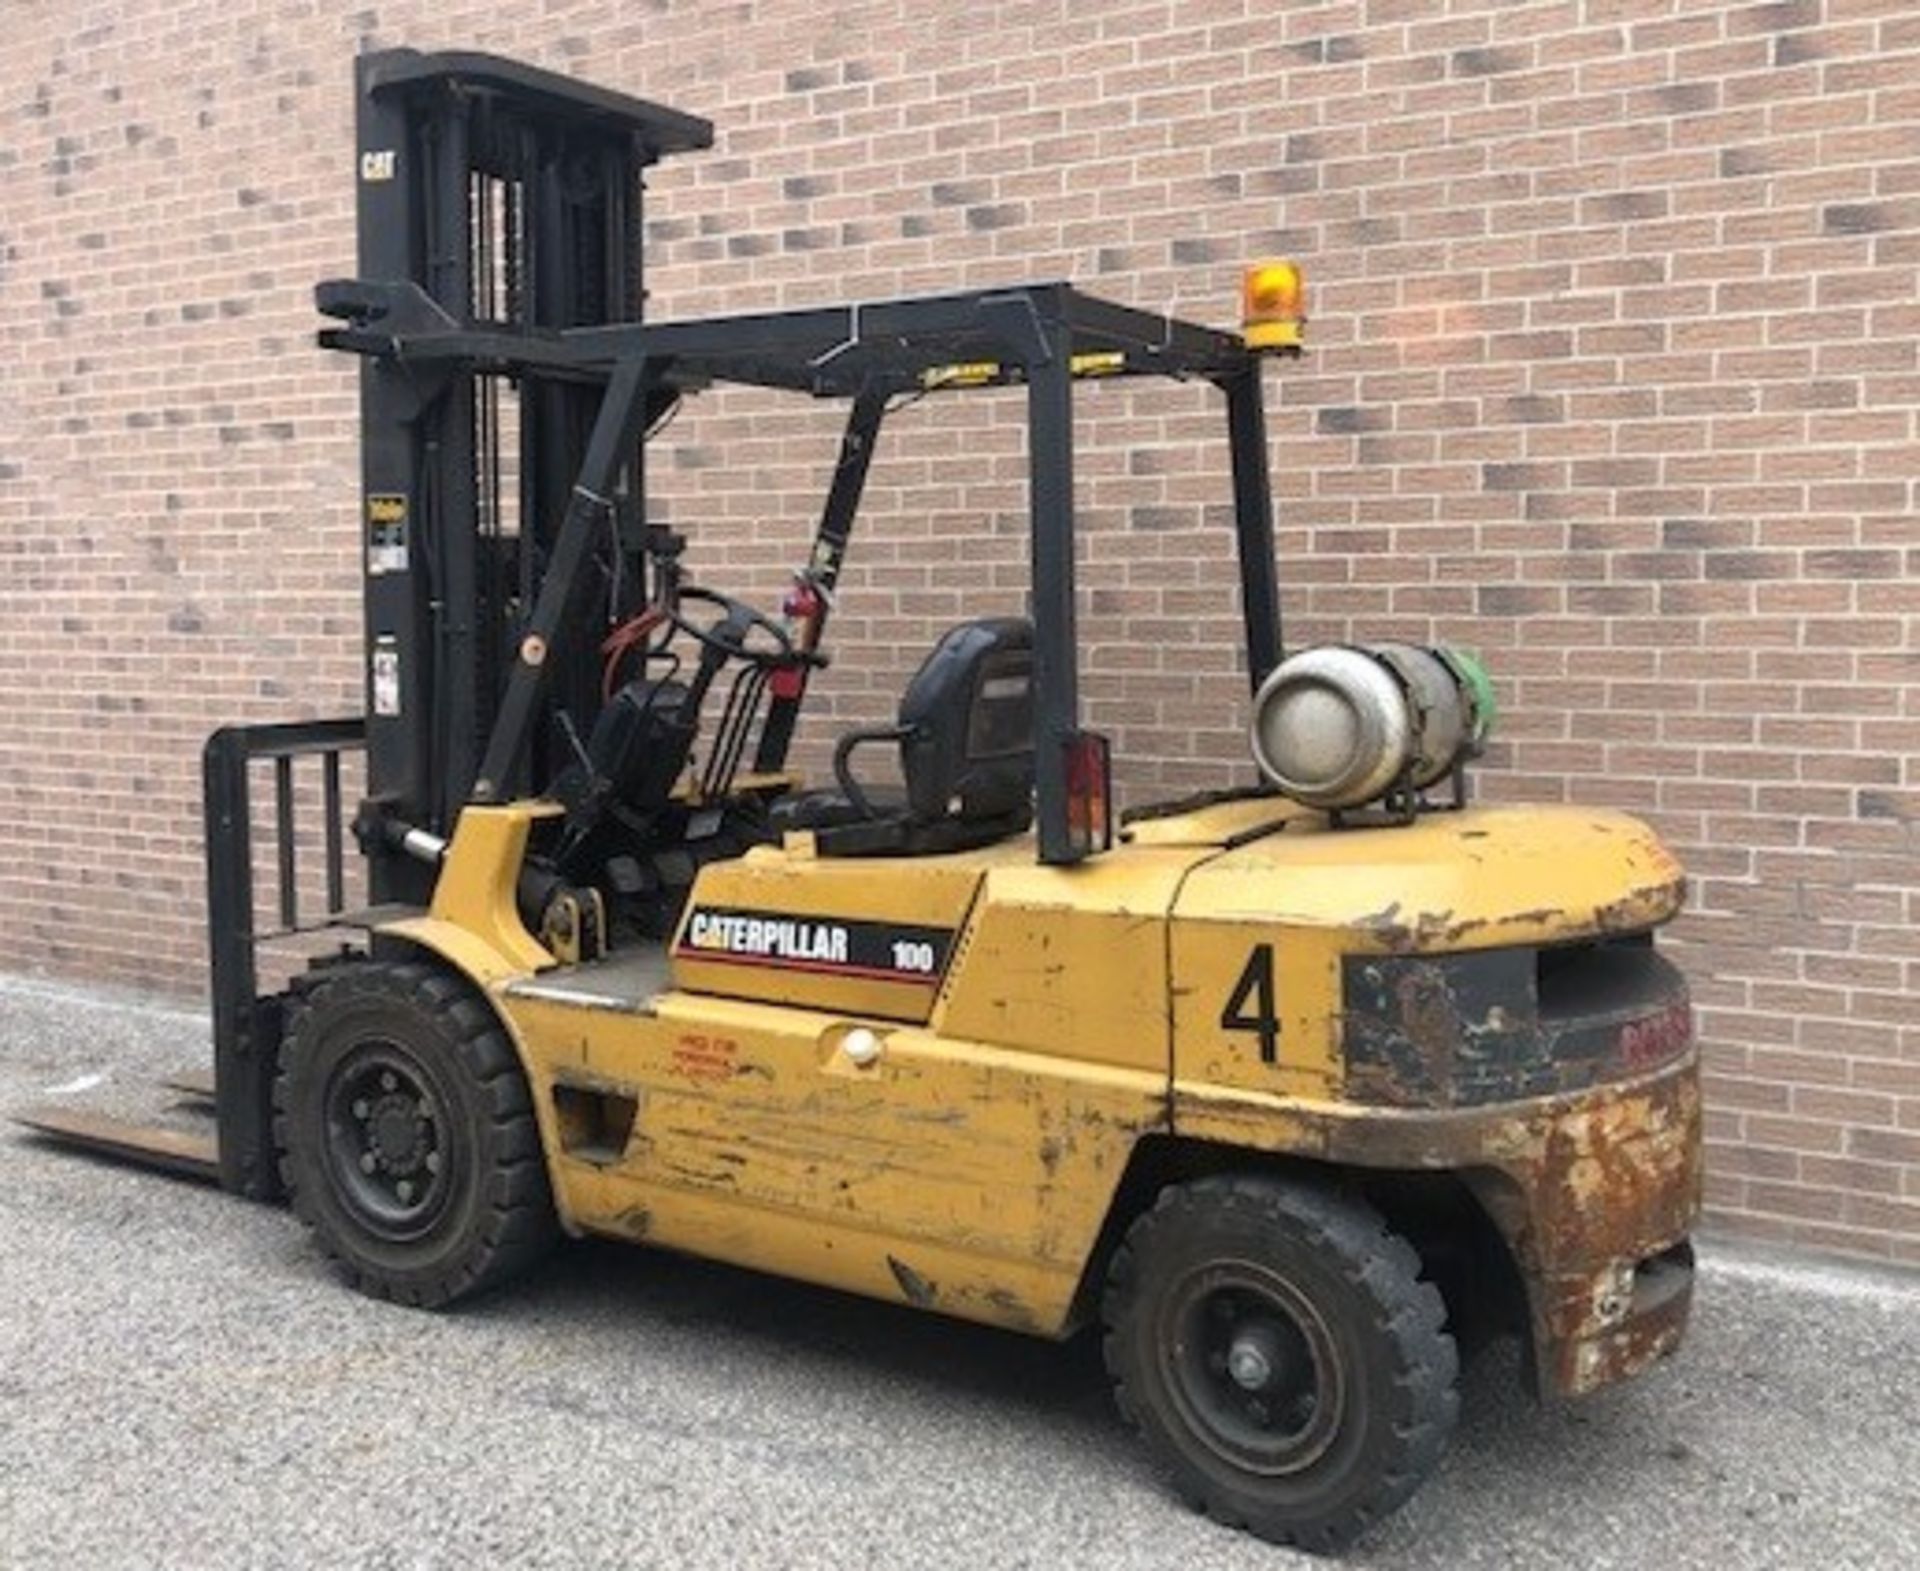 CATERPILLAR GP45 10,000 LBS CAP HIGH REACH LPG FORKLIFT WITH 238" MAX VERTICAL REACH, 3-STAGE HIGH - Image 7 of 12